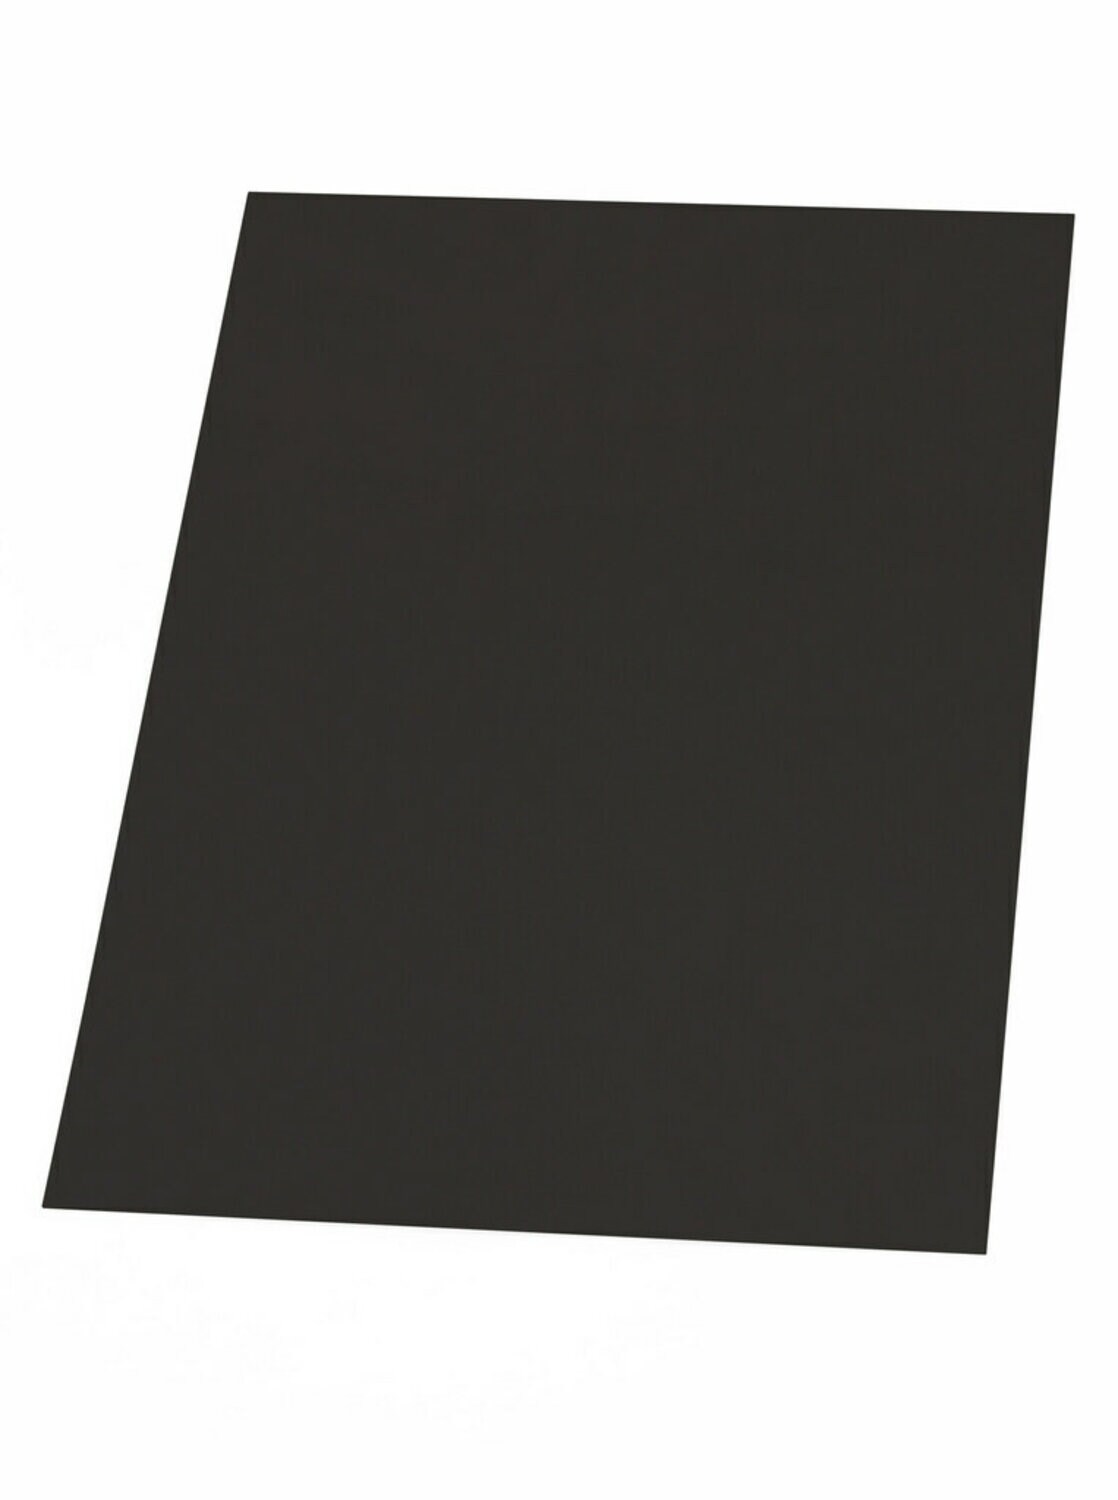 7010414753 - 3M Thermally Conductive Interface Pad Sheet 5595S, 100 mm x 100 mm, 2.0
mm, 1/Case, Sample